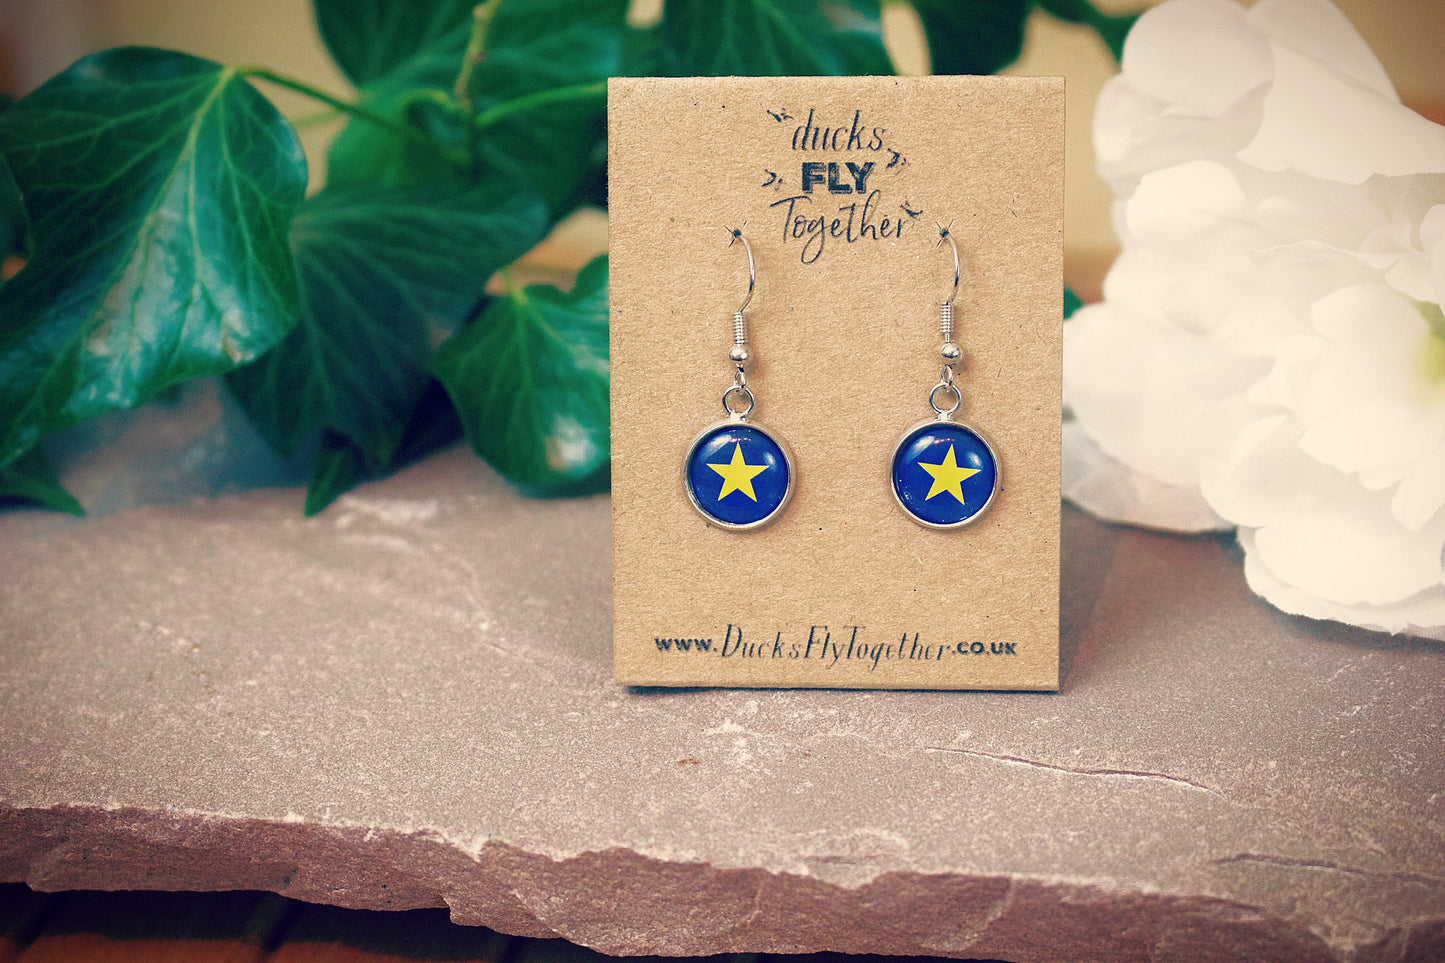 EU Flag Earrings. Single Star Remain. Anti Brexit jewellery. Pro European. Europe gift. Personalised Gift for wife, girlfriend, mum. Liberal